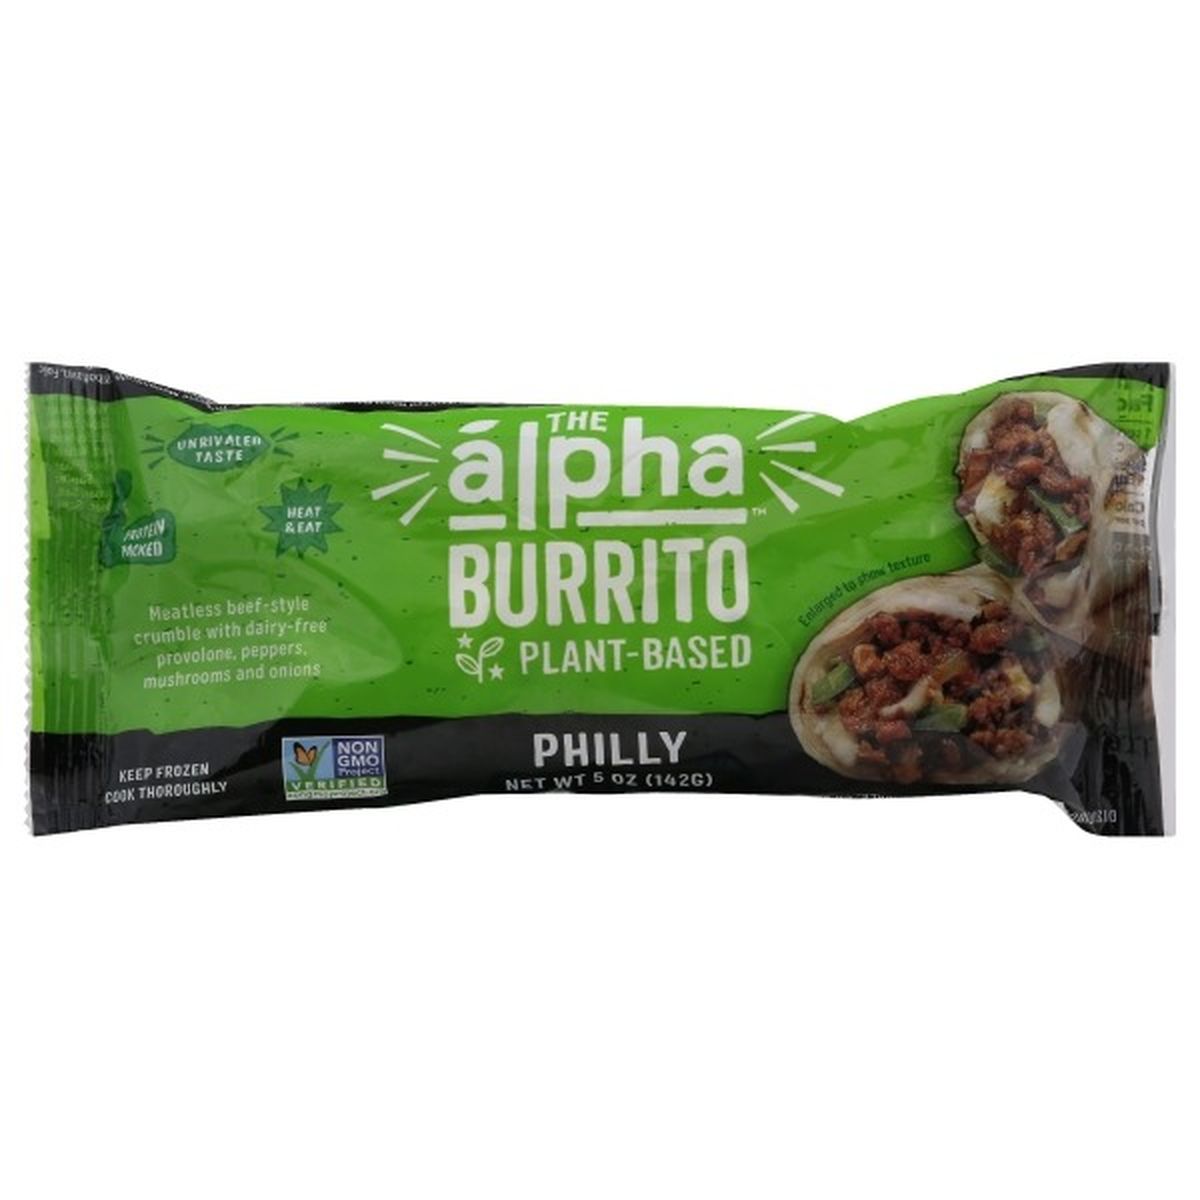 Calories in Alpha Burrito, Philly, Plant-Based